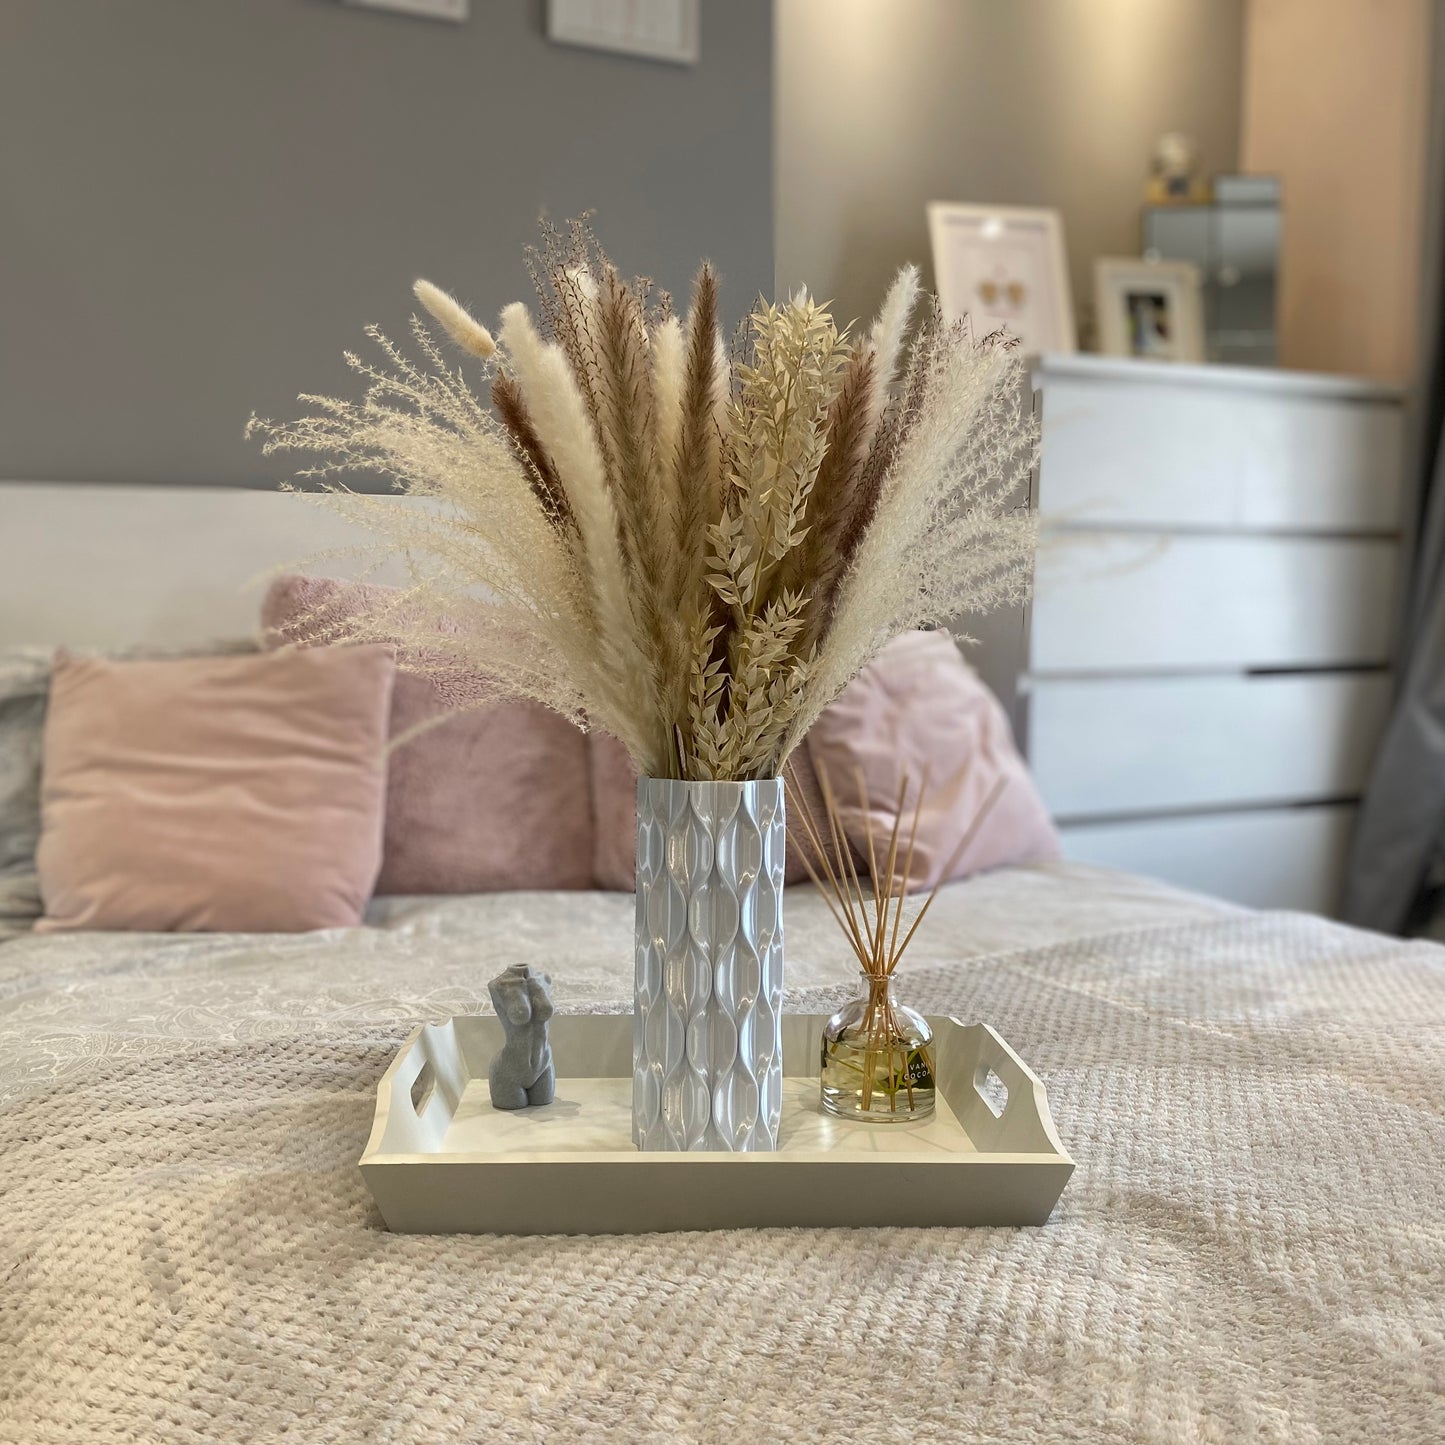 This Contemporary Collection features an unusual oval honeycomb pattern with lovely accentuated gentle contours to create a very striking look piece fresh cut flowers or dried pampas grass favourite side board table or shelf bring charm elegance interior décor